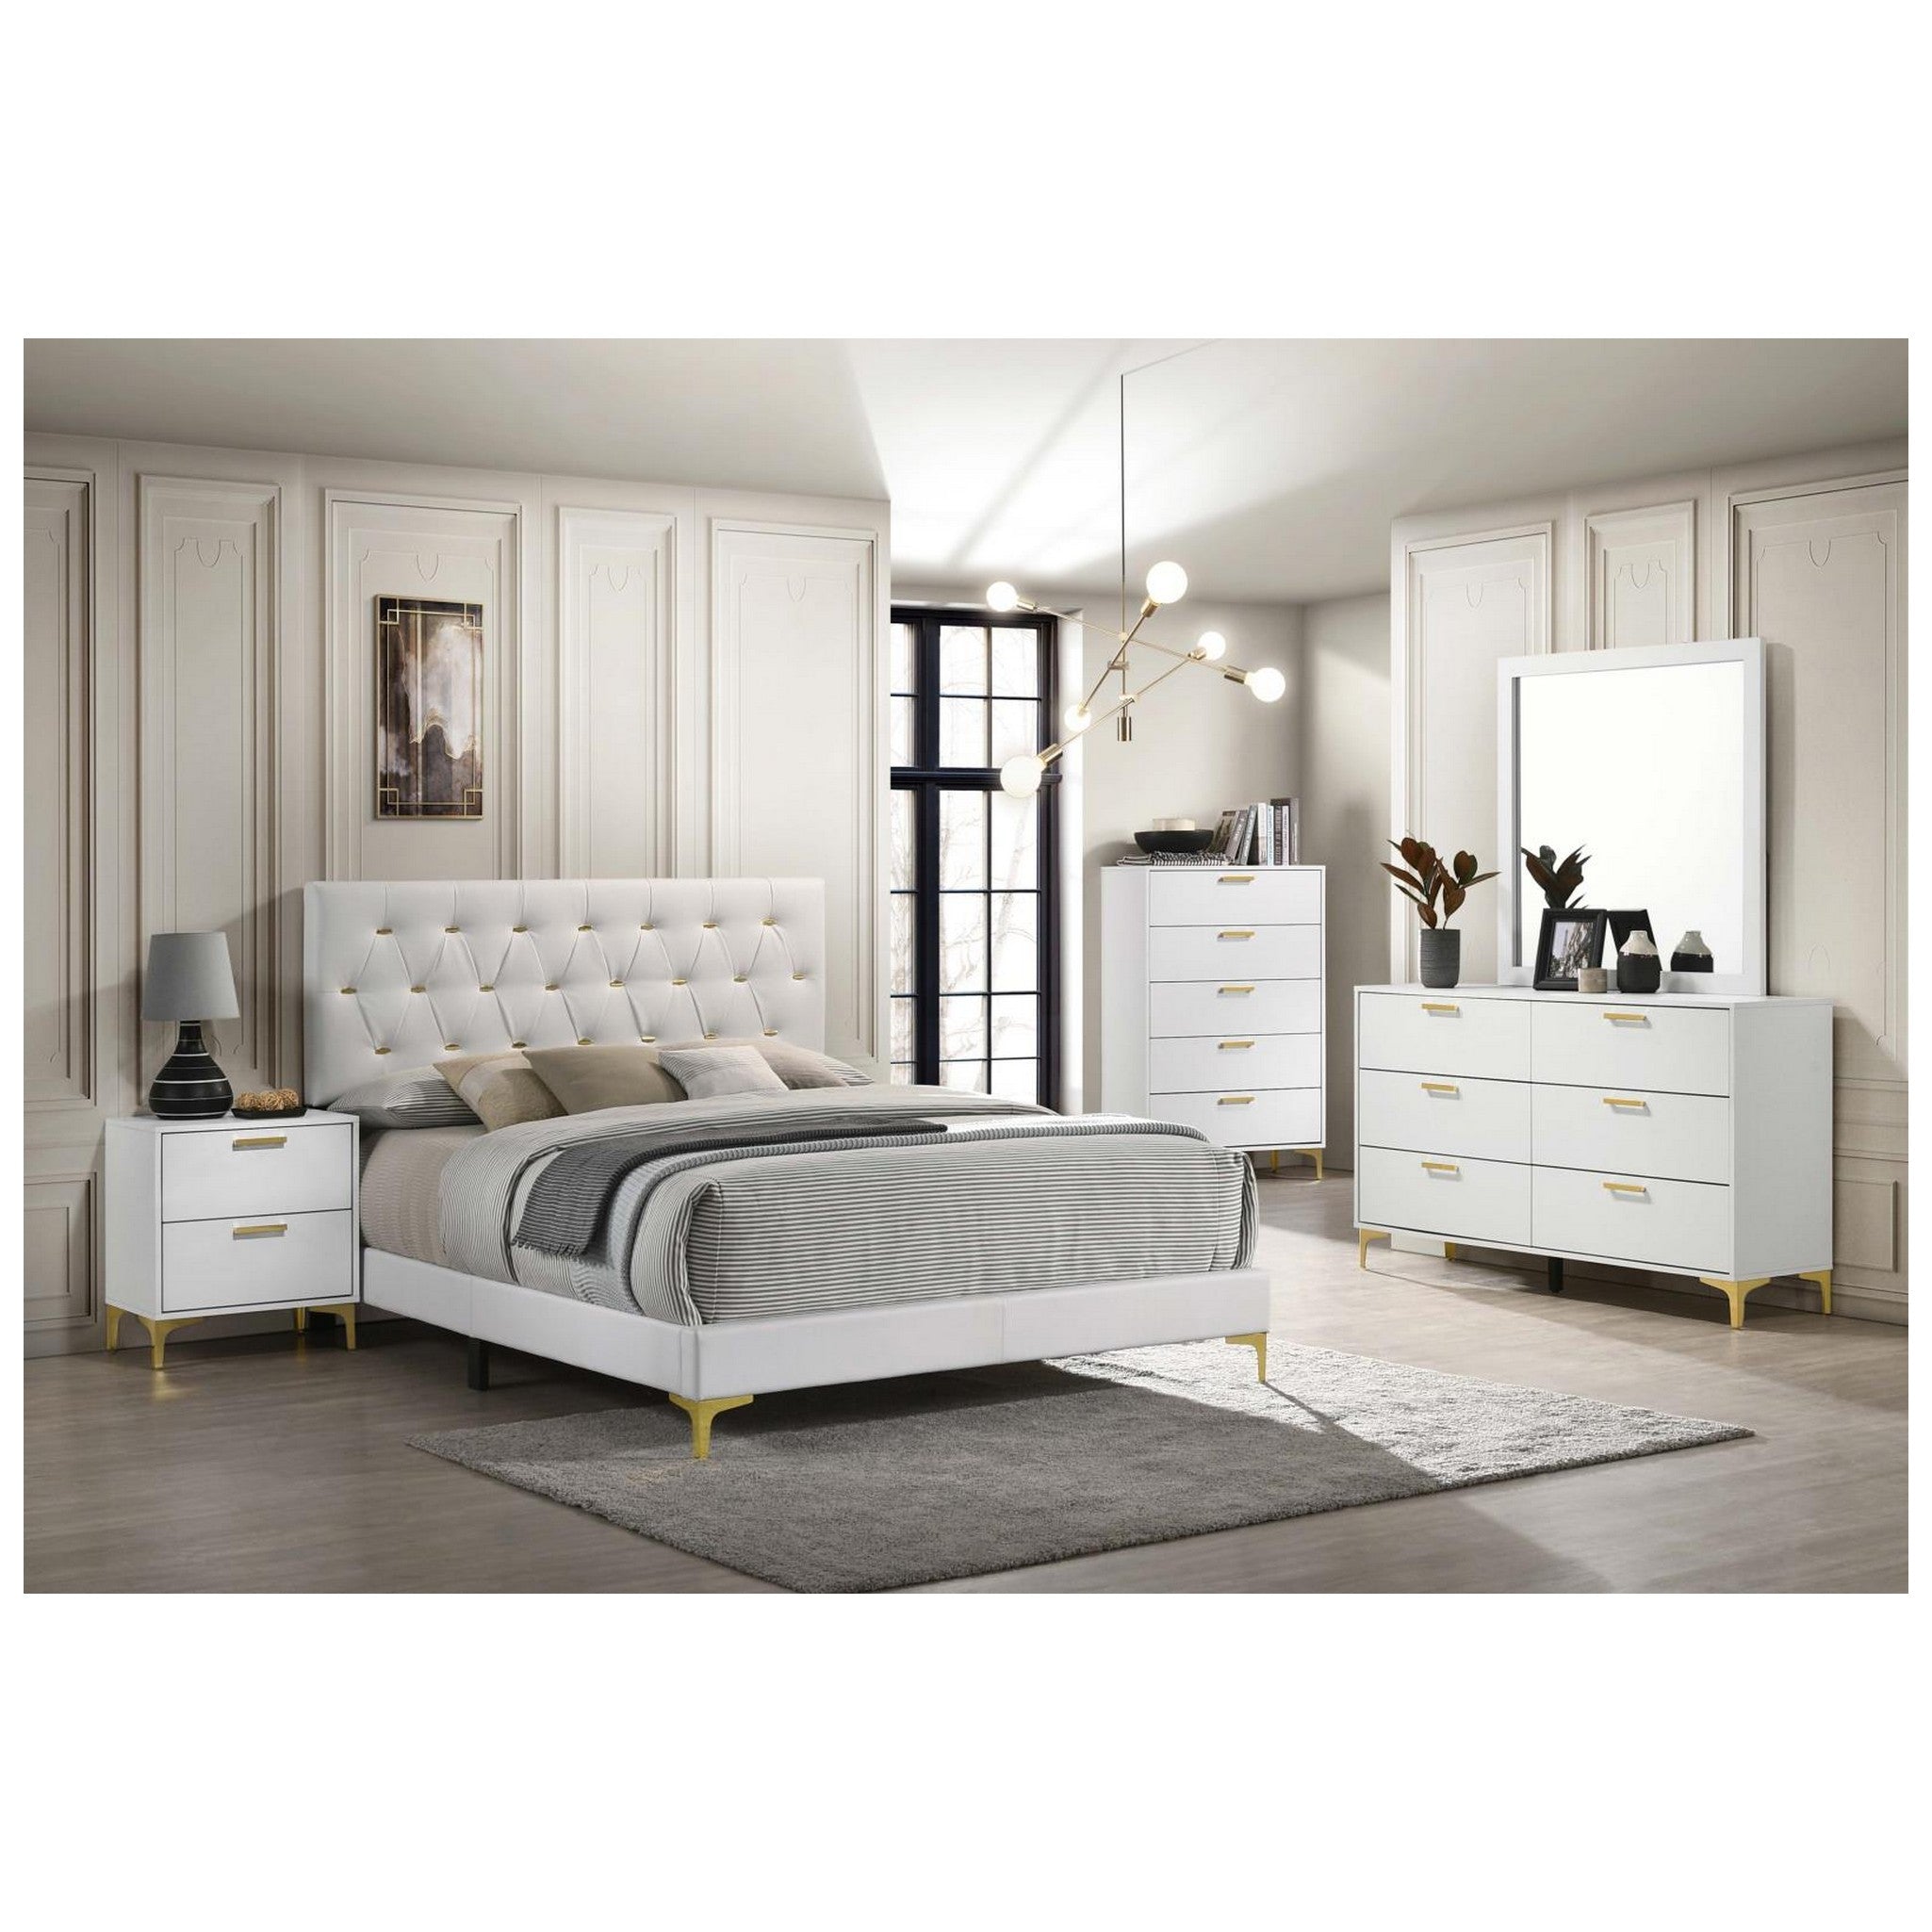 Kendall Tufted Upholstered Panel California King Bed White 224401KW